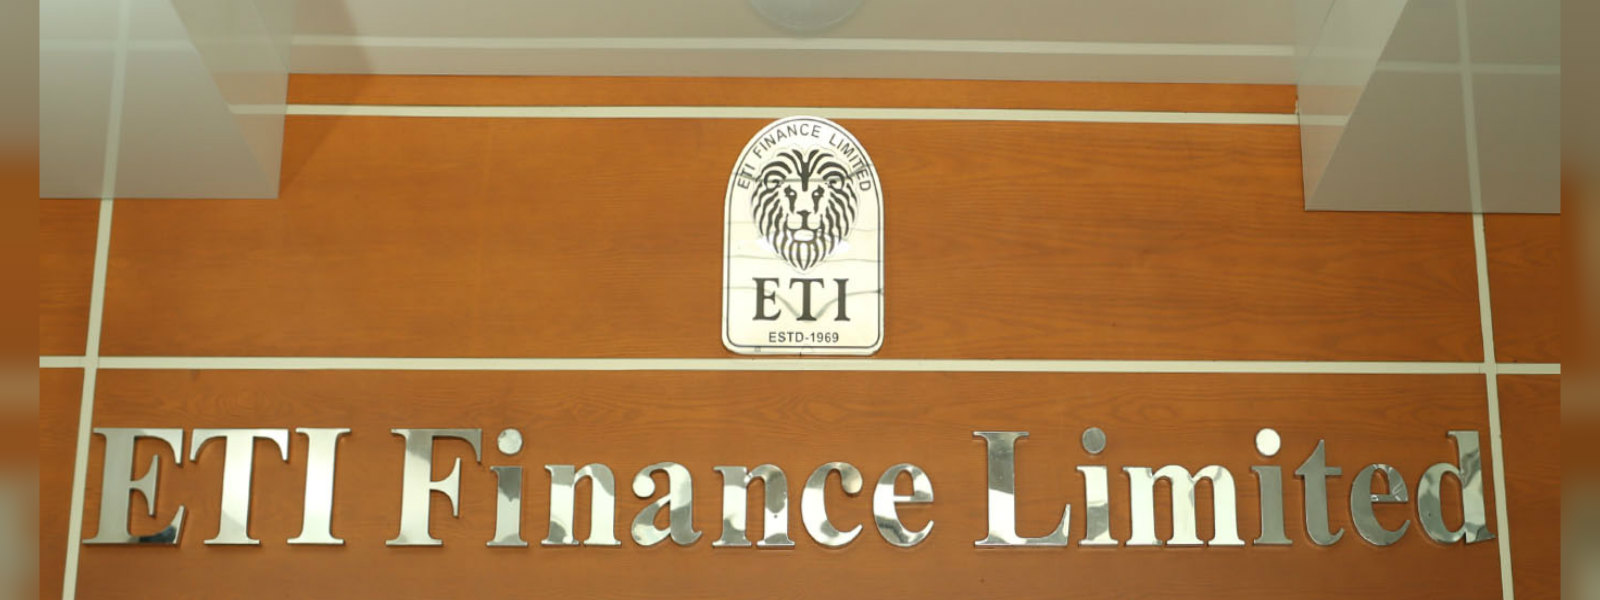 PC appointed to investigate ETI Finance